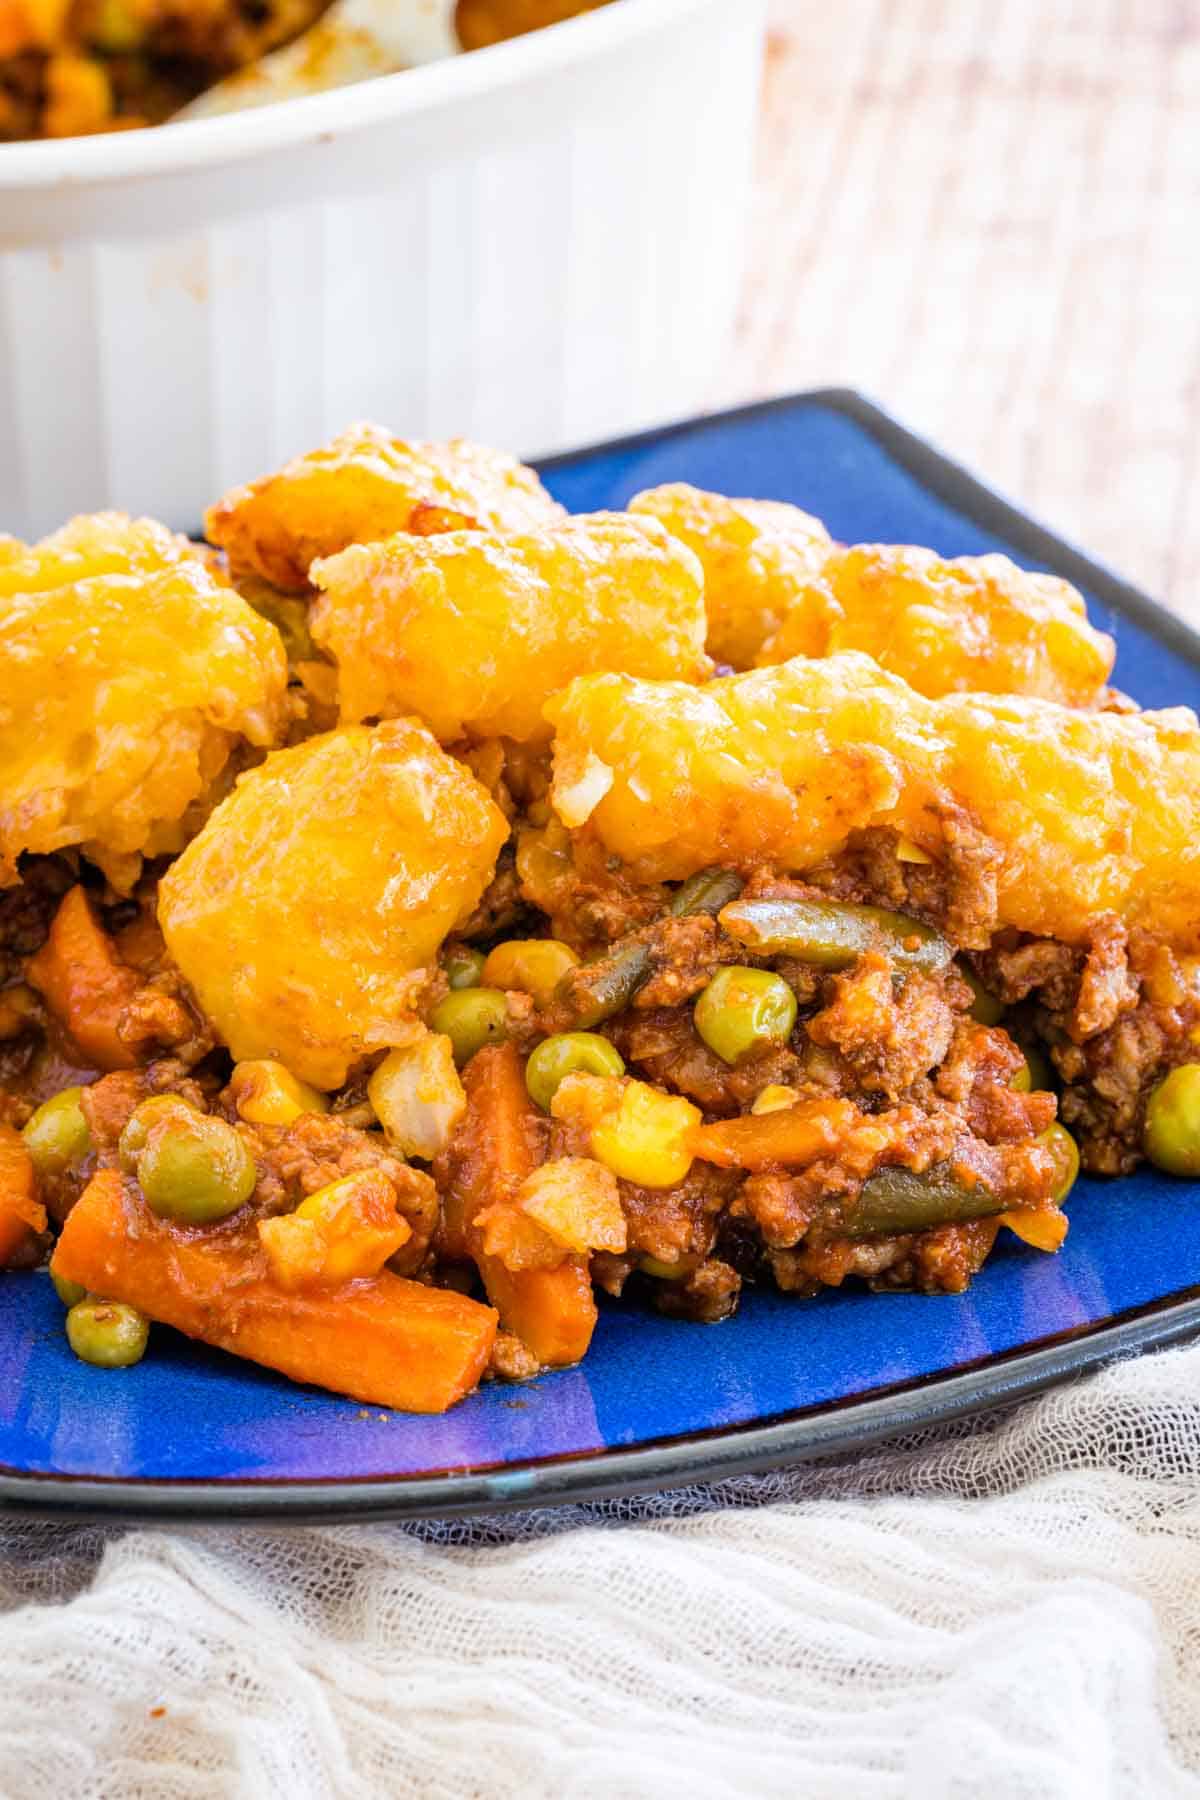 A serving of tater tot shepherd's pie on a blue plate.